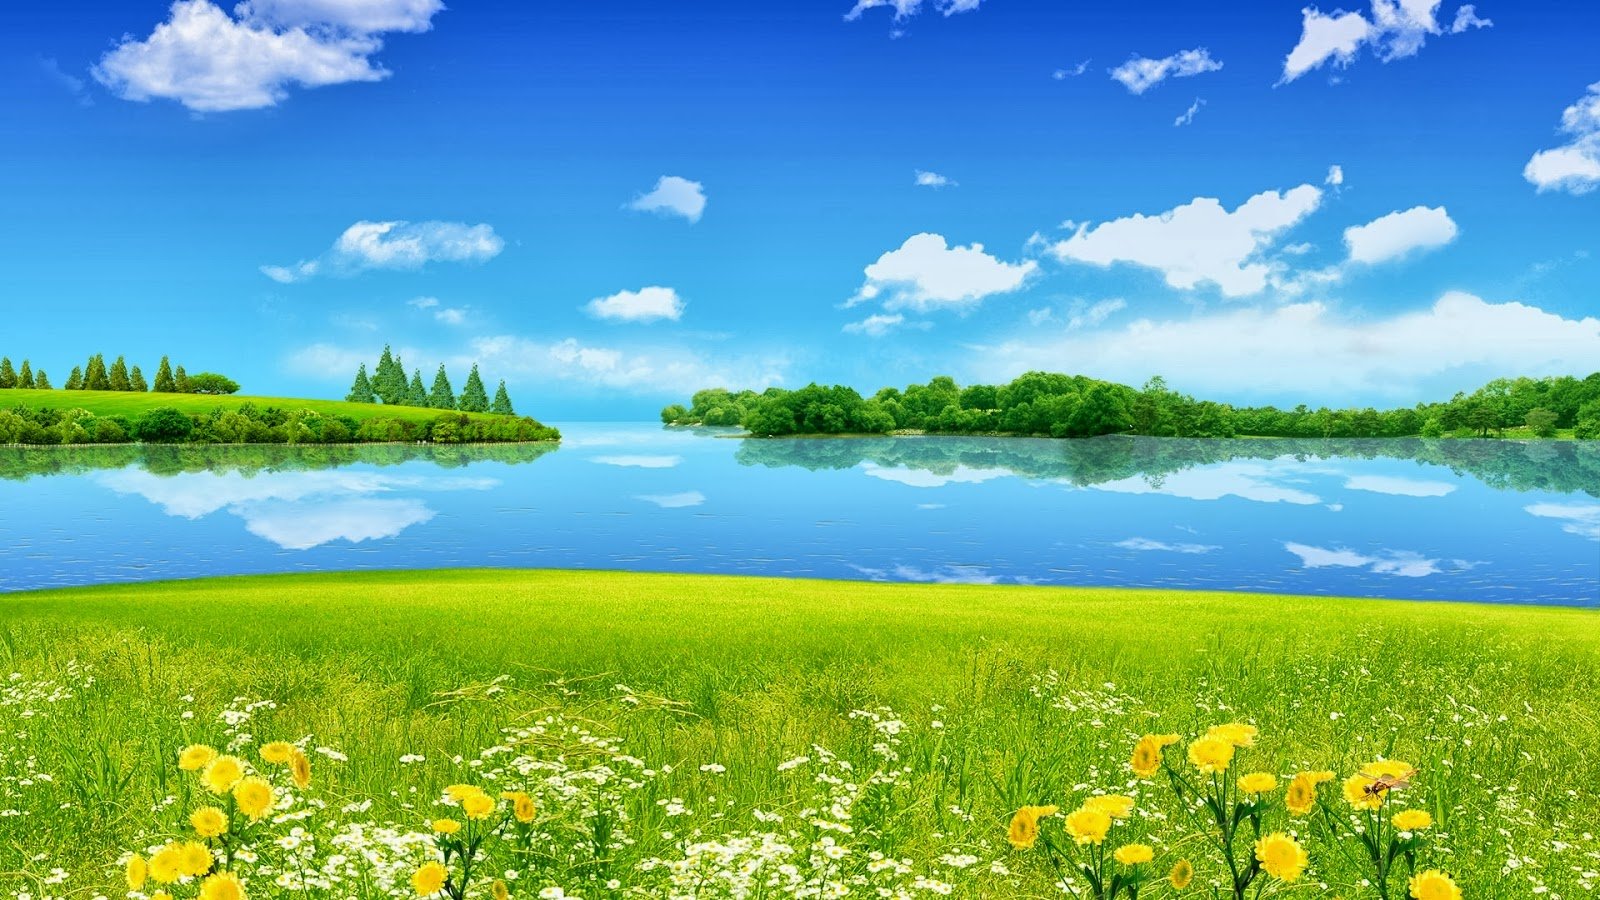  HD Nature Wallpapers Downloads For Laptop PC Desktop Backgrounds 1600x900